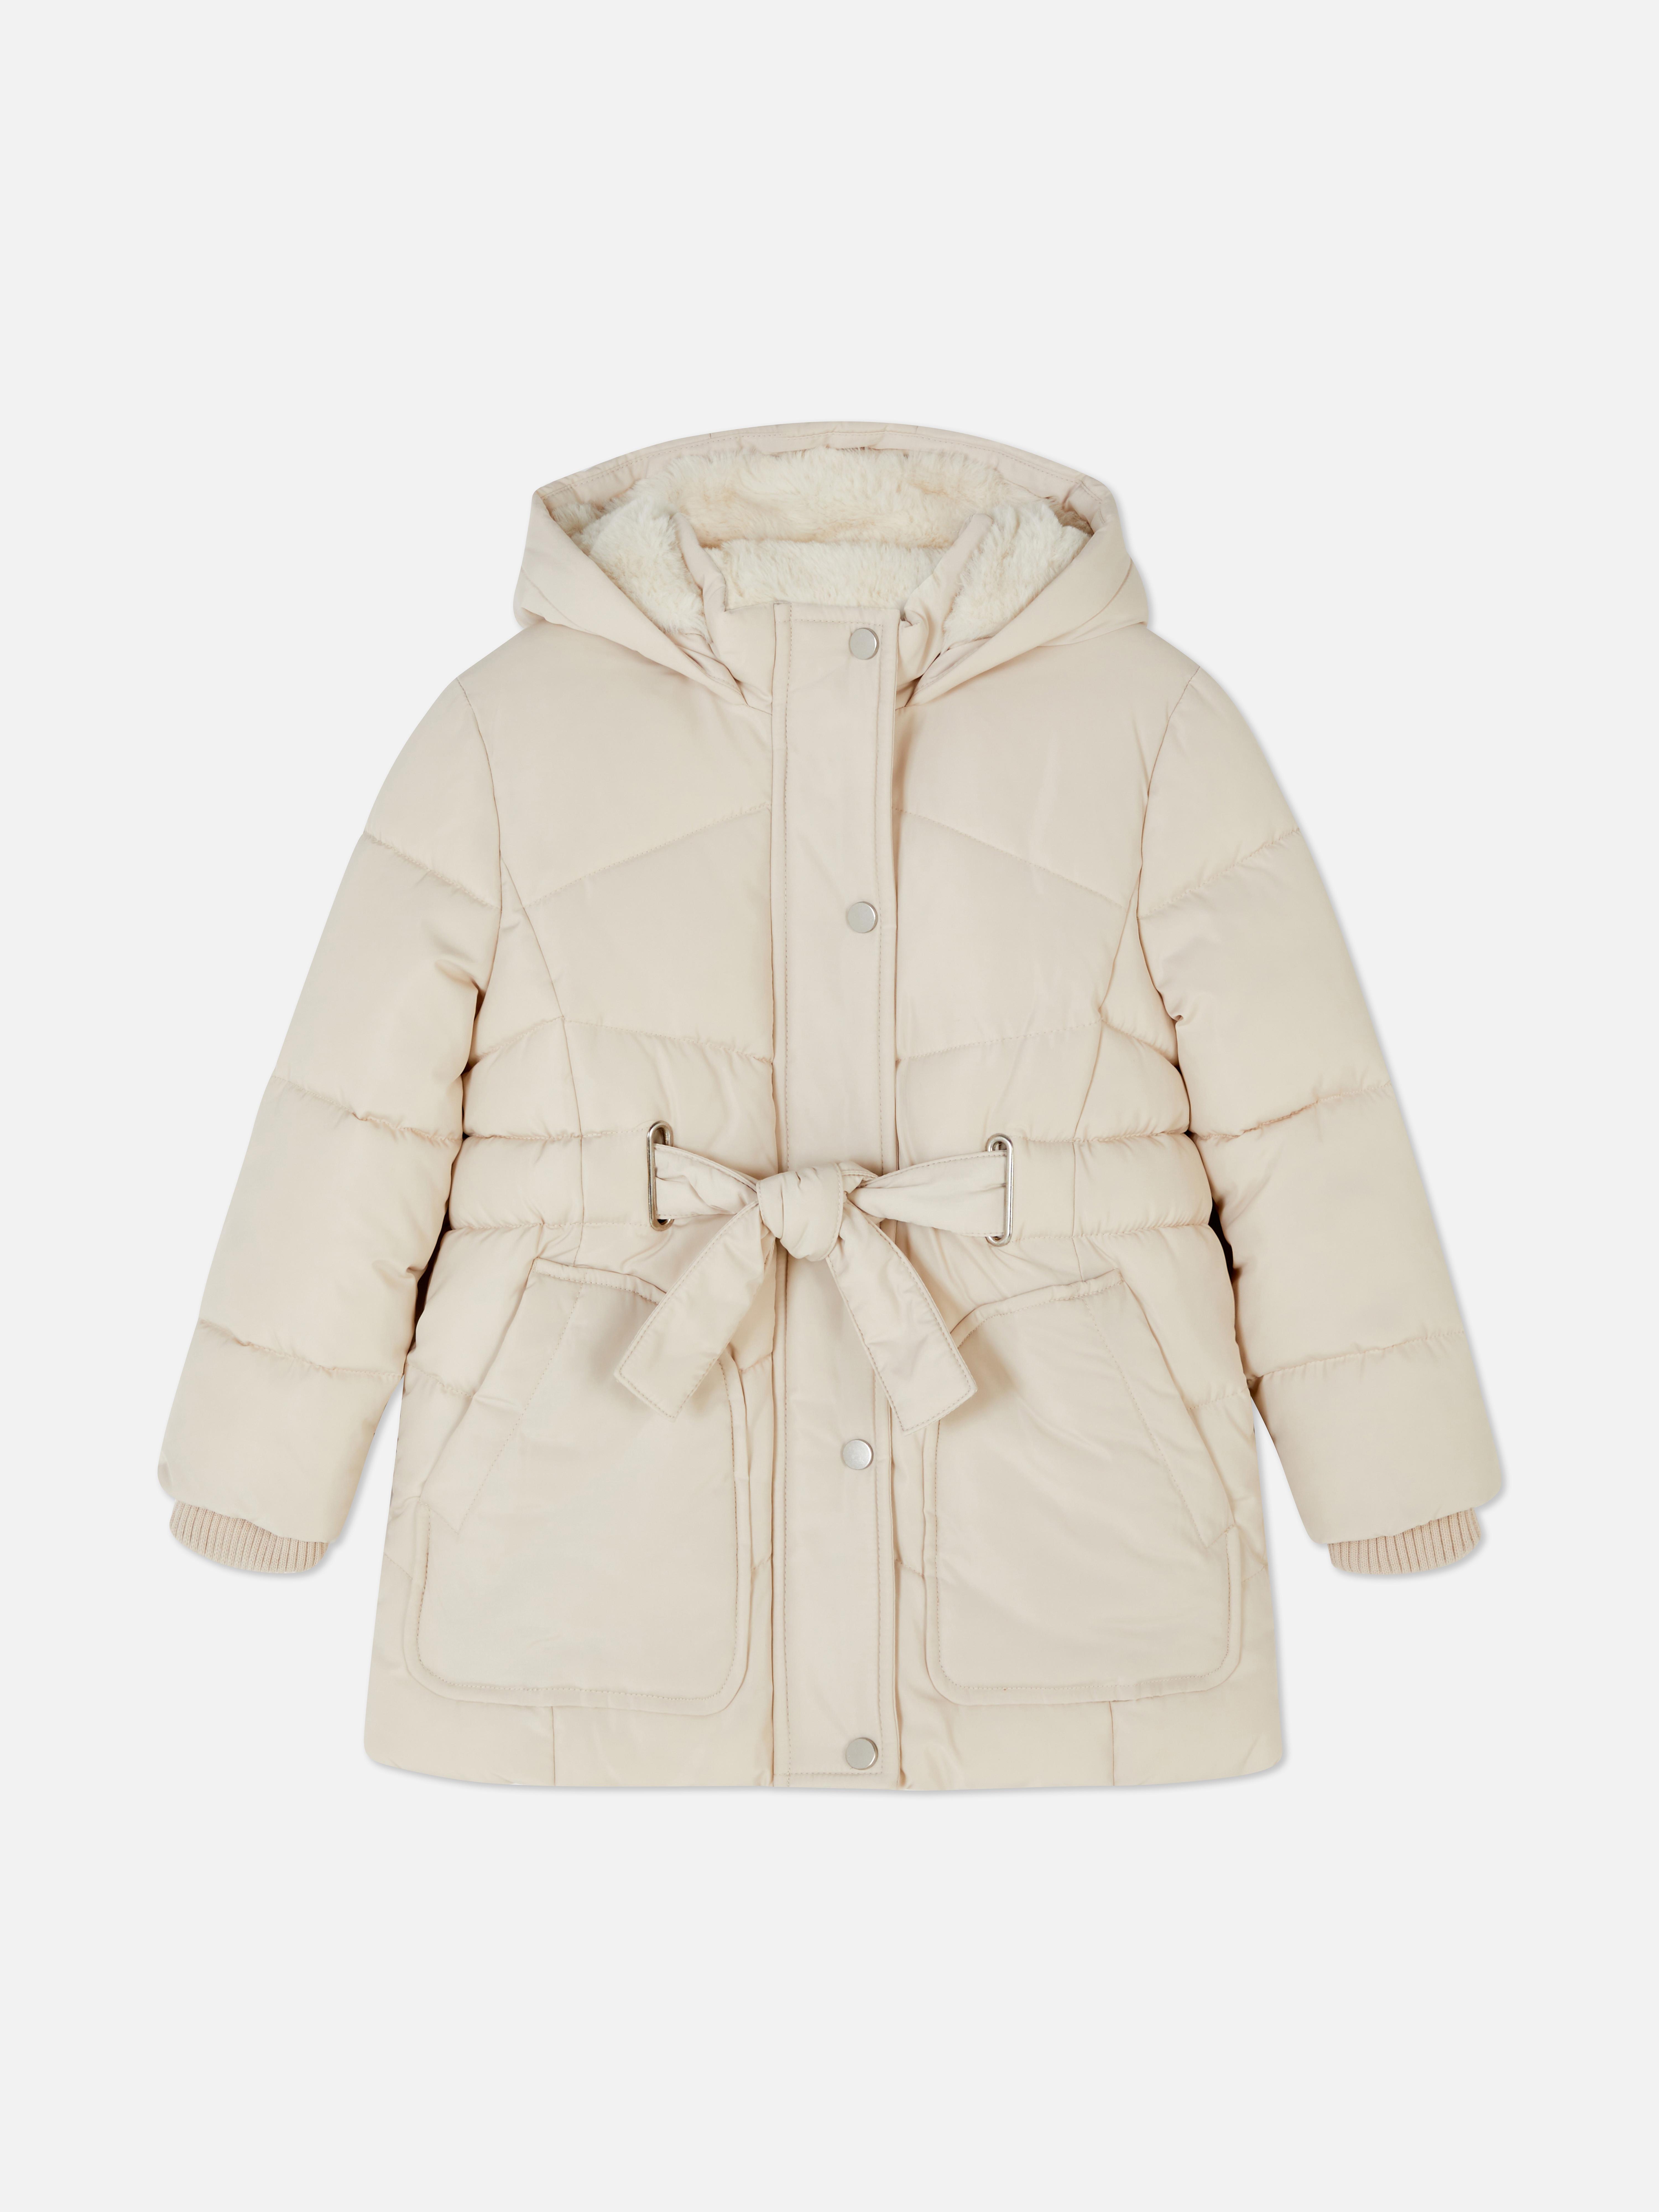 Gratificante Hija Acuoso Belted Padded Jacket | Girls' Clothes, Age 2-7 | Girls Clothes | Kids'  Clothes | All Primark Products | Primark